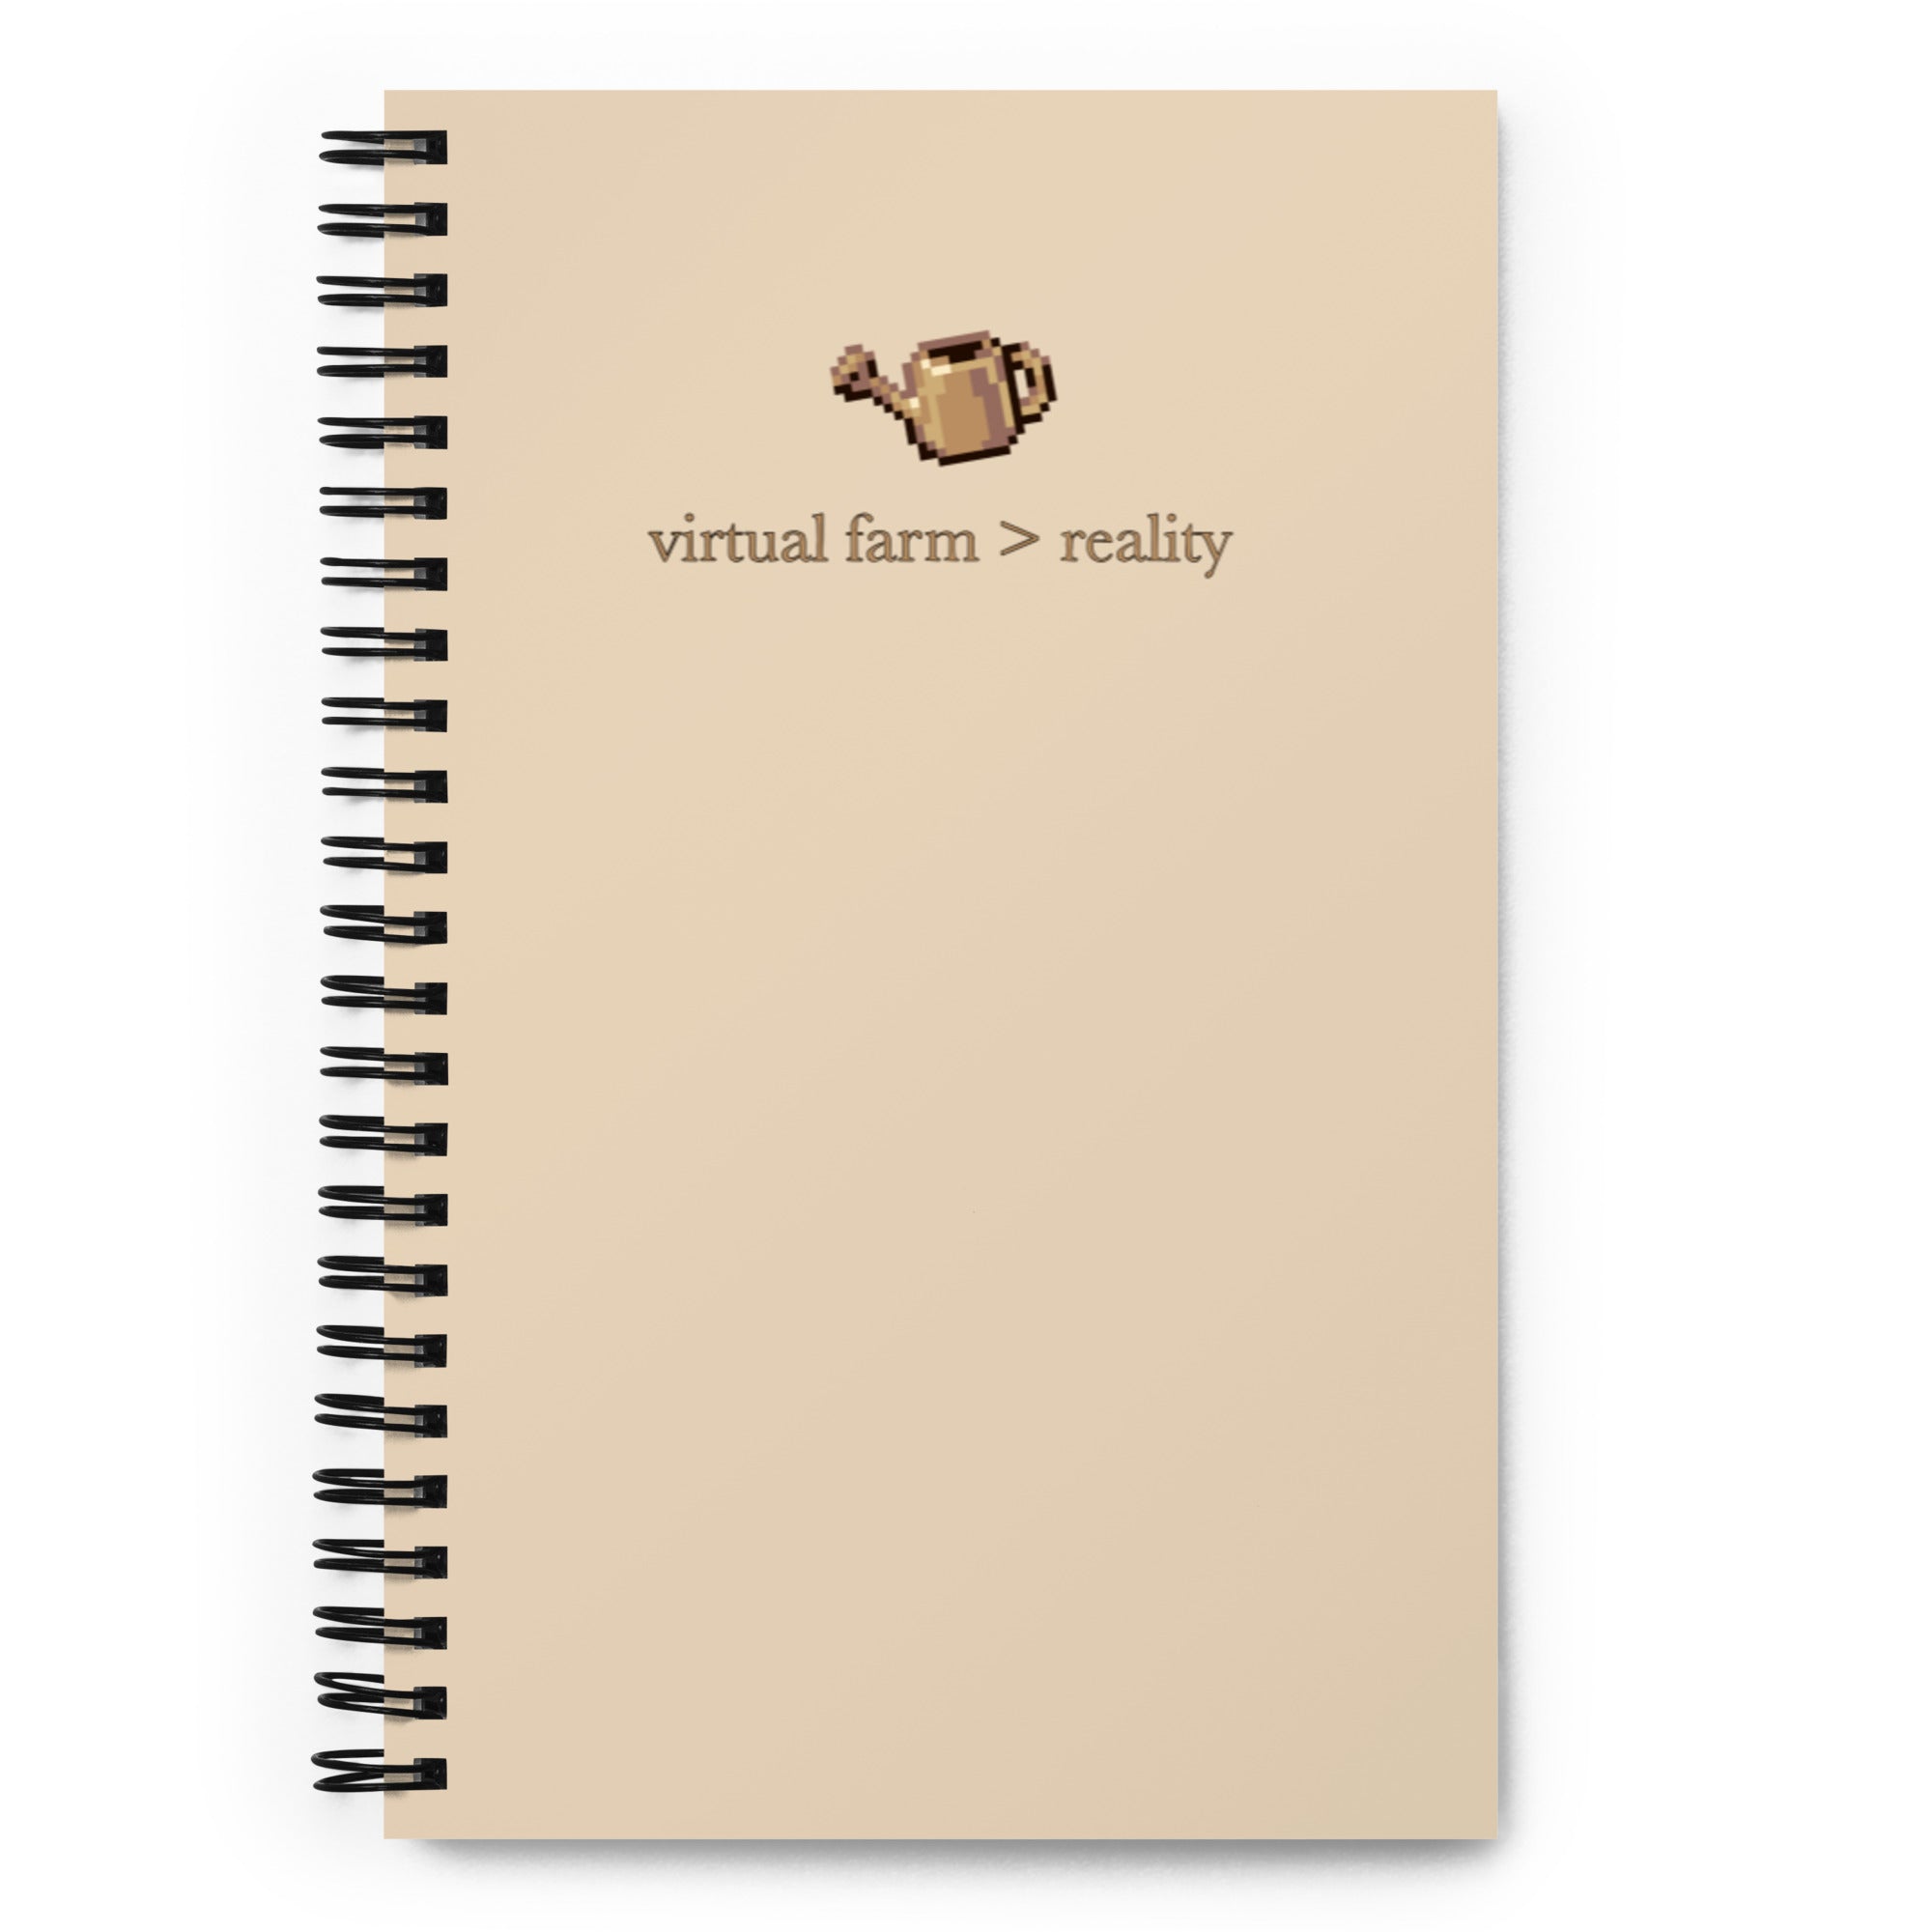 Virtual Farm Over Reality | Spiral notebook | Cozy Gamer Threads and Thistles Inventory 